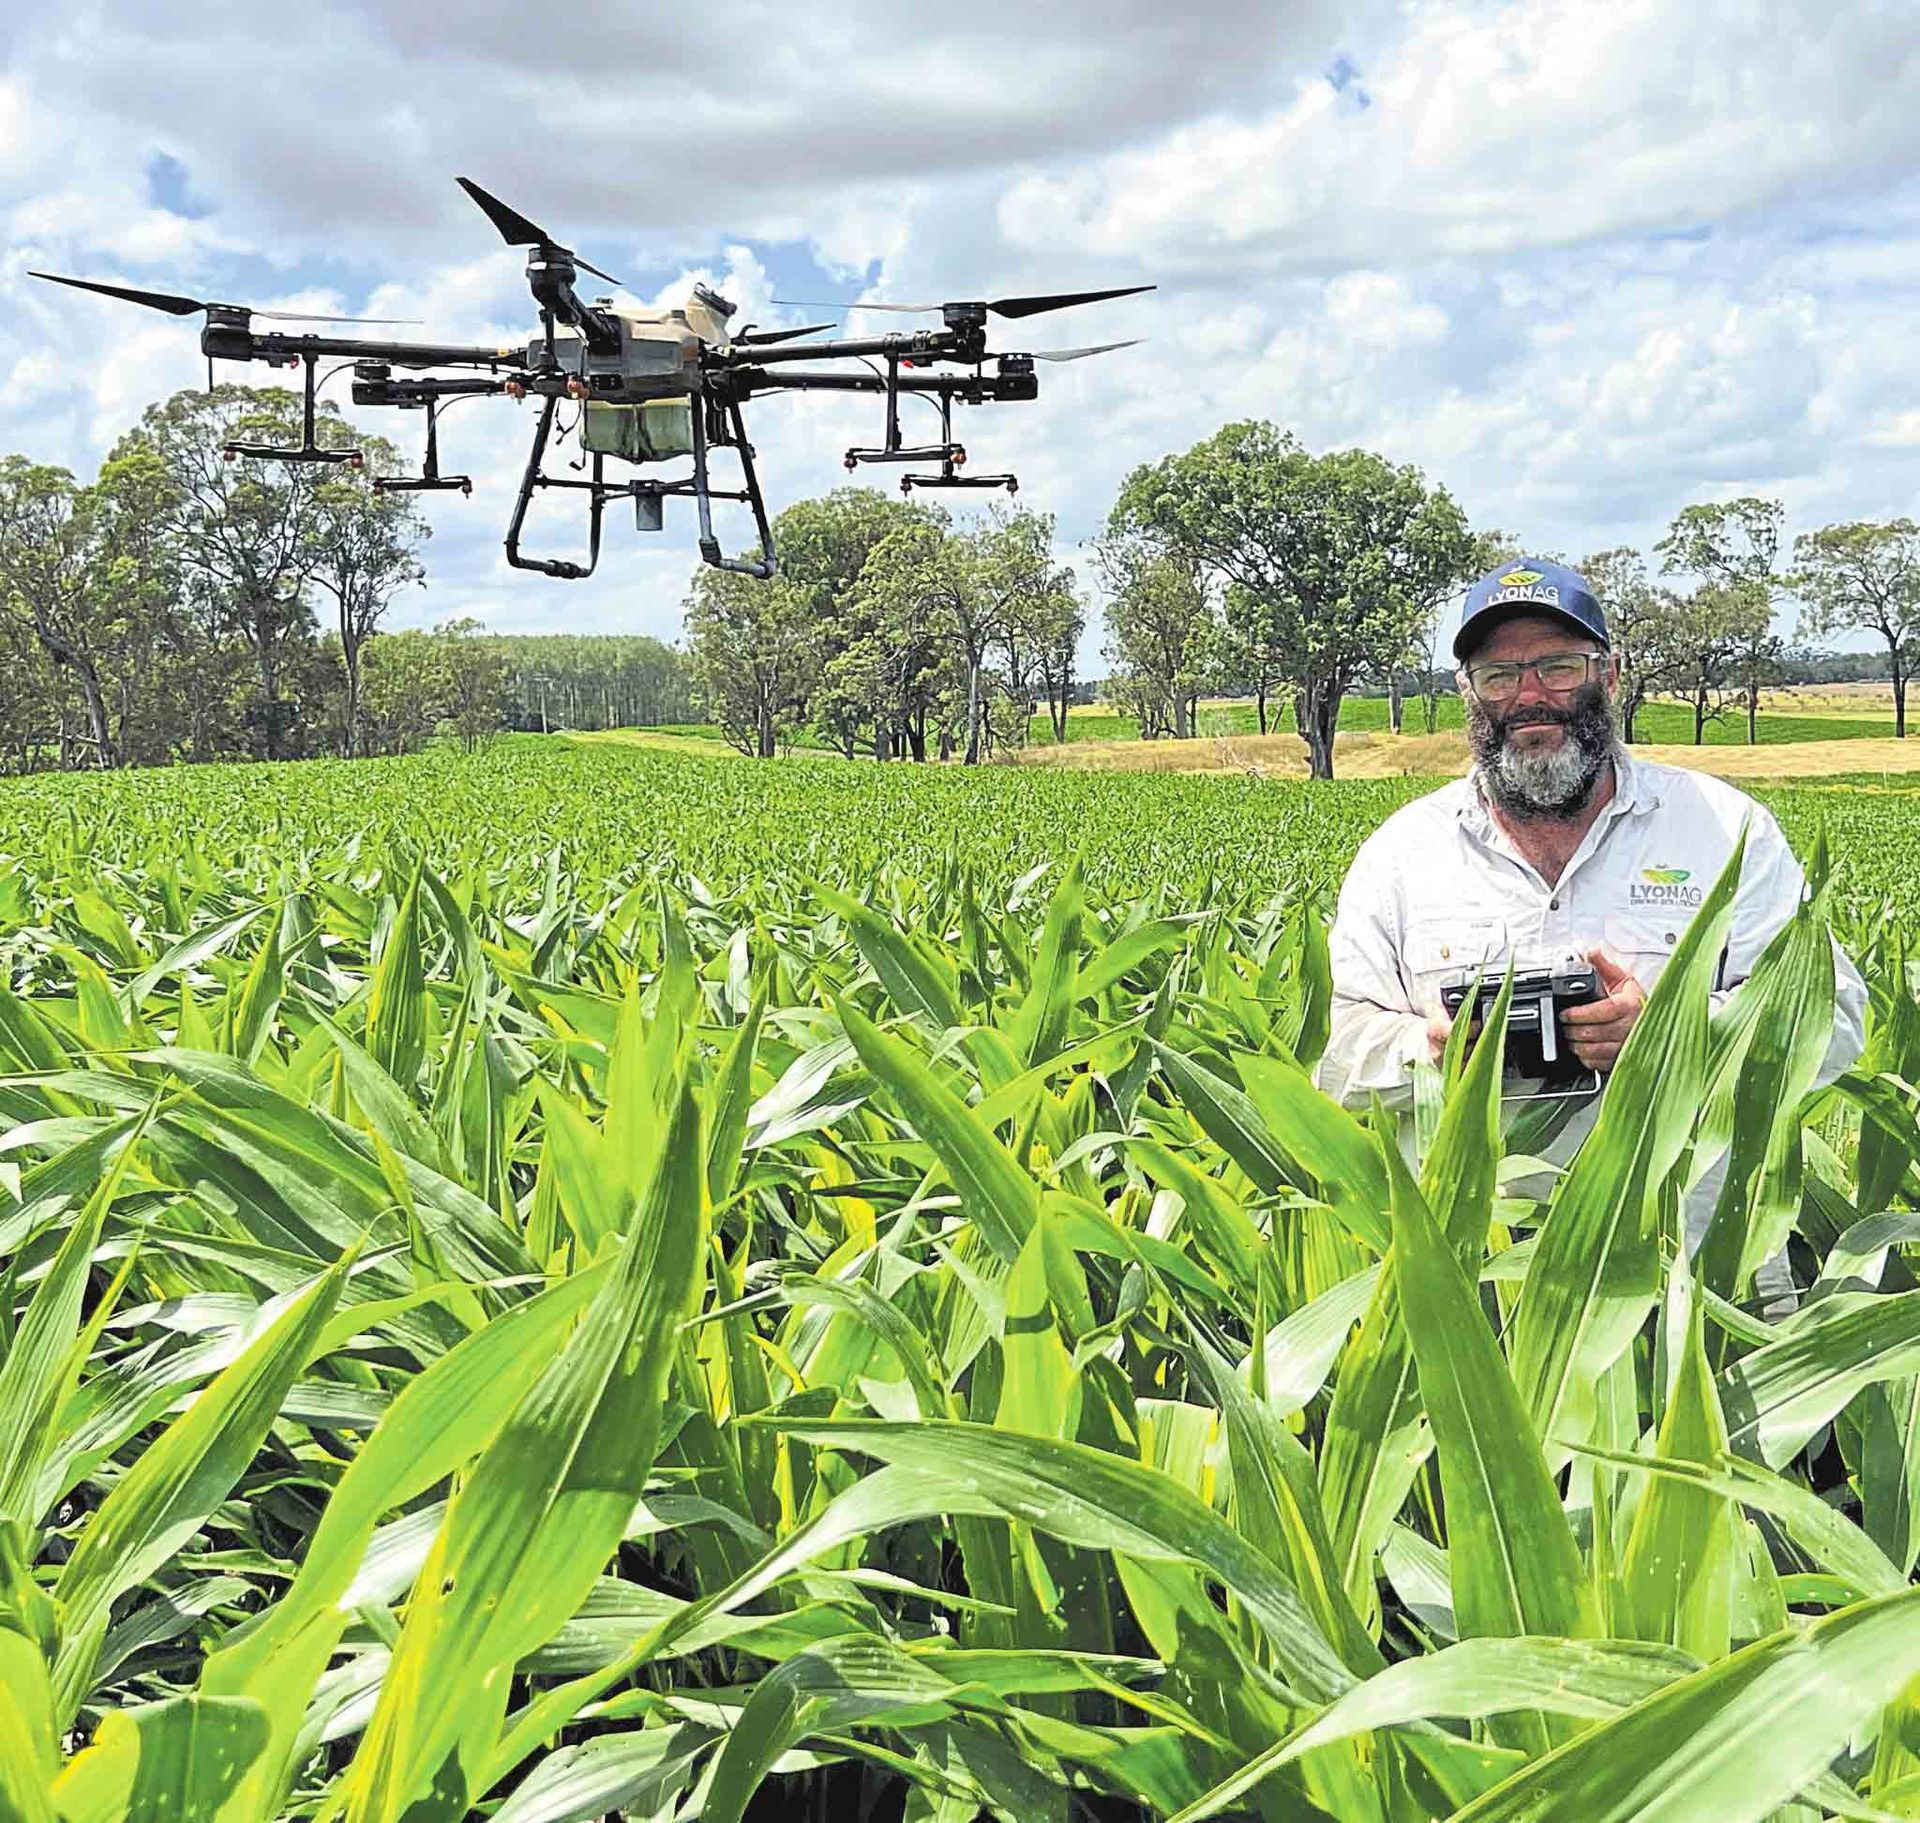 James Lyon, Lyon Ag, Nowendoc, manages three crews using swarms of drones to to manage country ...